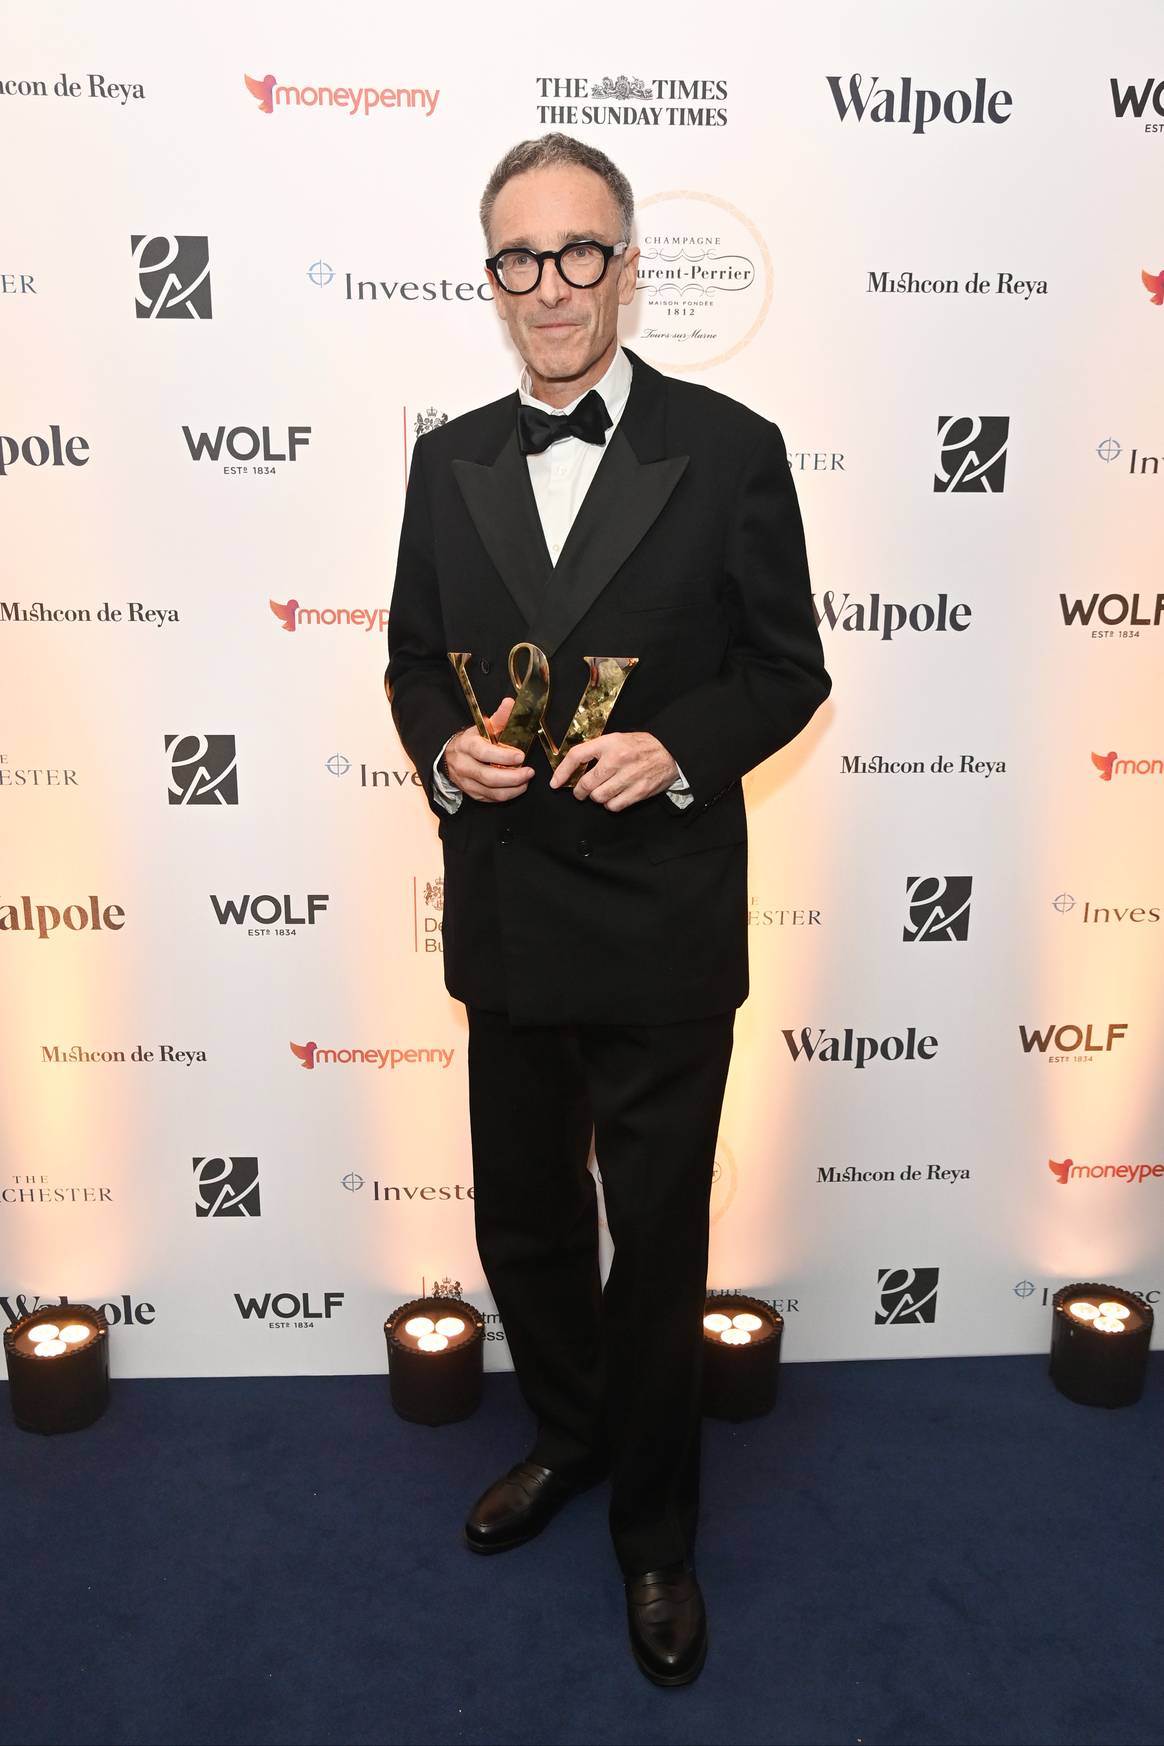 Nicholas Brooke, owner of Sunspel, winners of the ‘Made in the UK’ award at the Walpole British Luxury Awards 2023